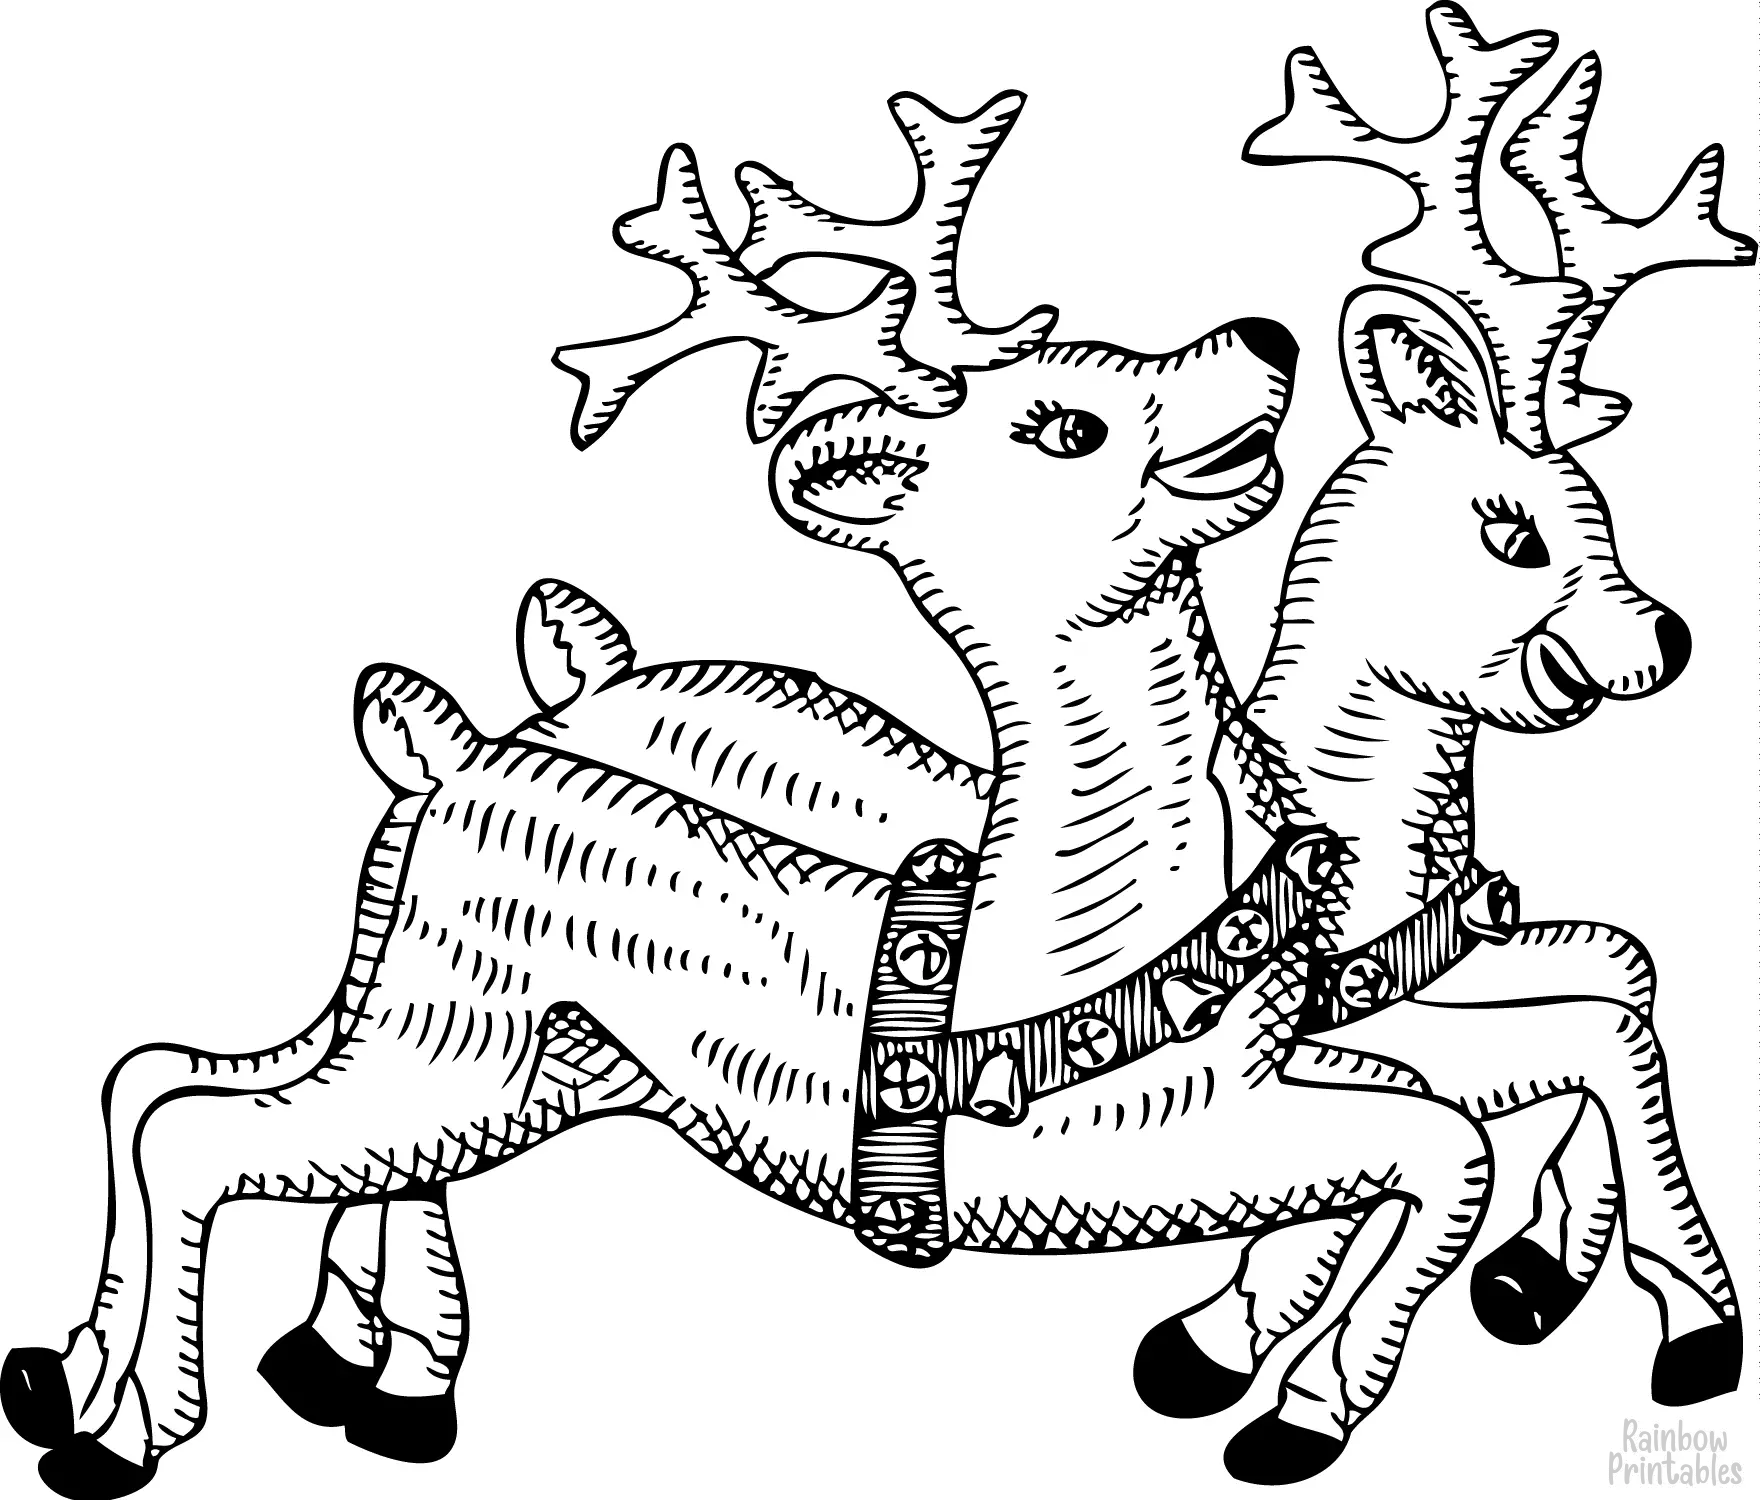 Simple Reindeer Coloring Page Christmas Xmas Coloring Activities for Kids